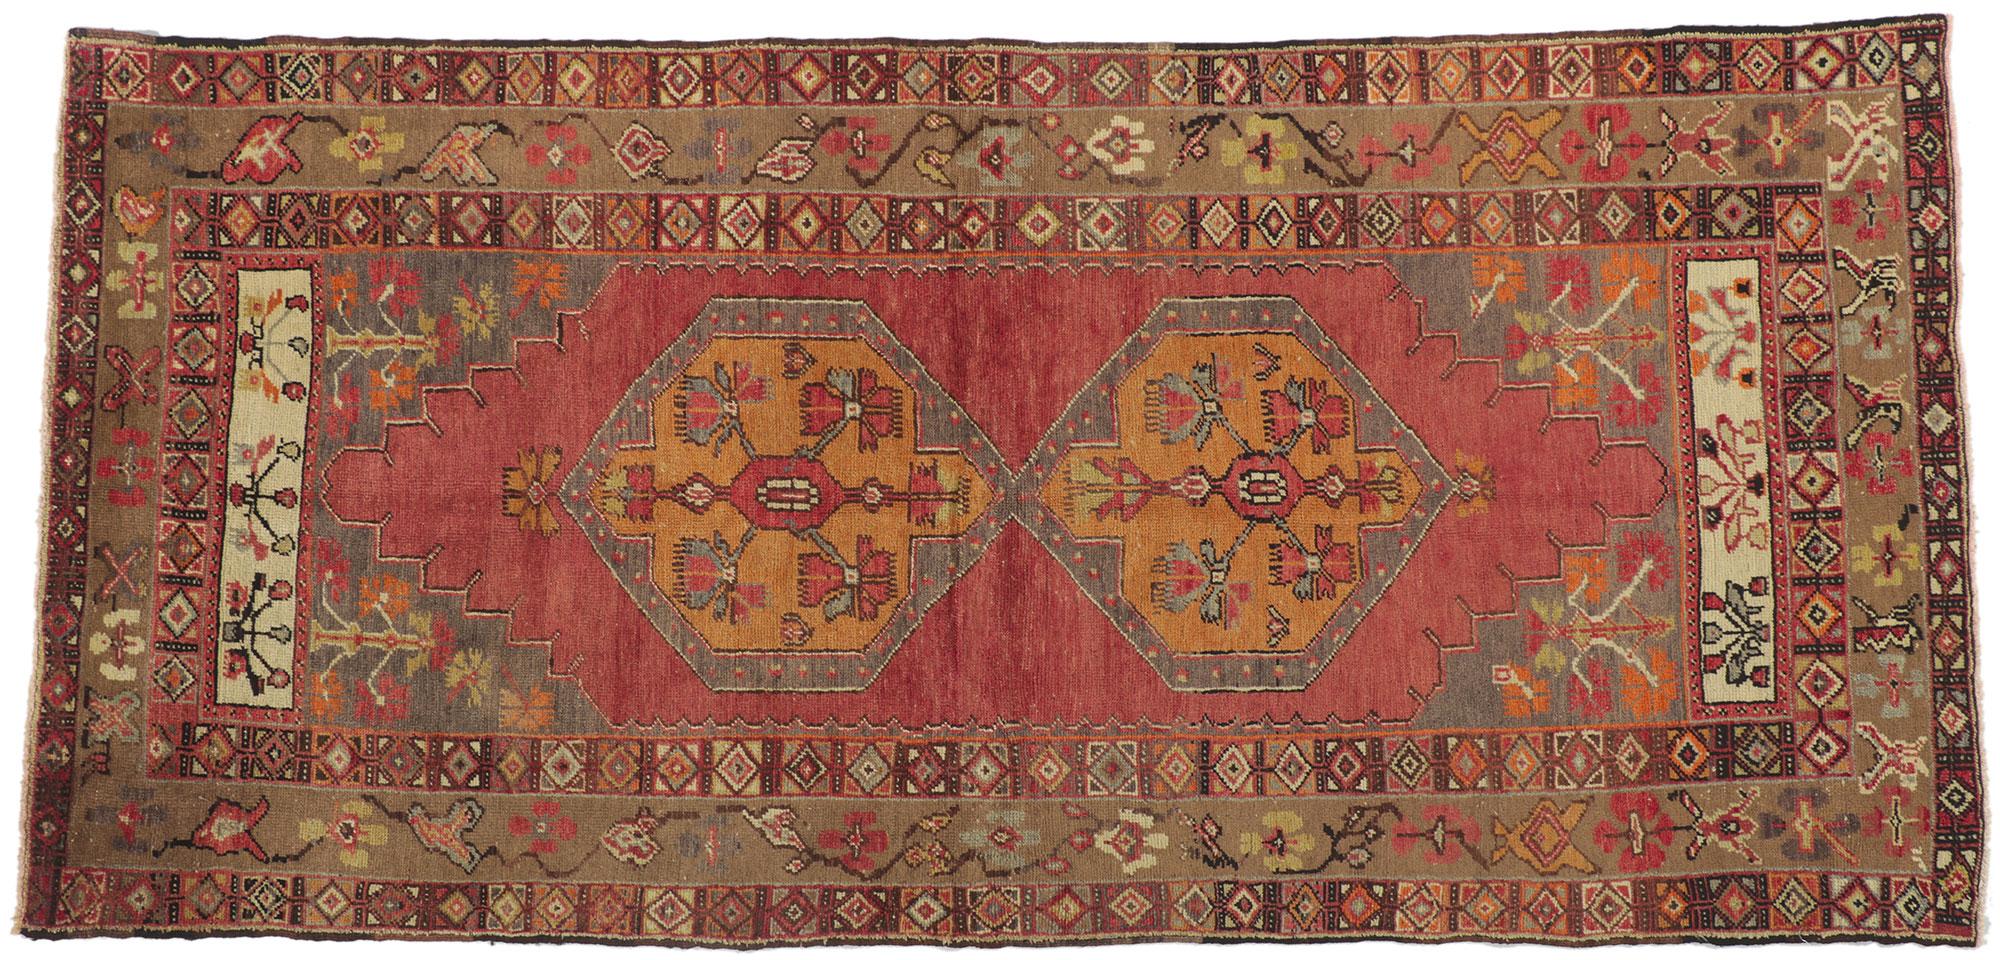 Vintage Turkish Oushak Rug Runner with Rustic Earth-Tone Colors For Sale 4